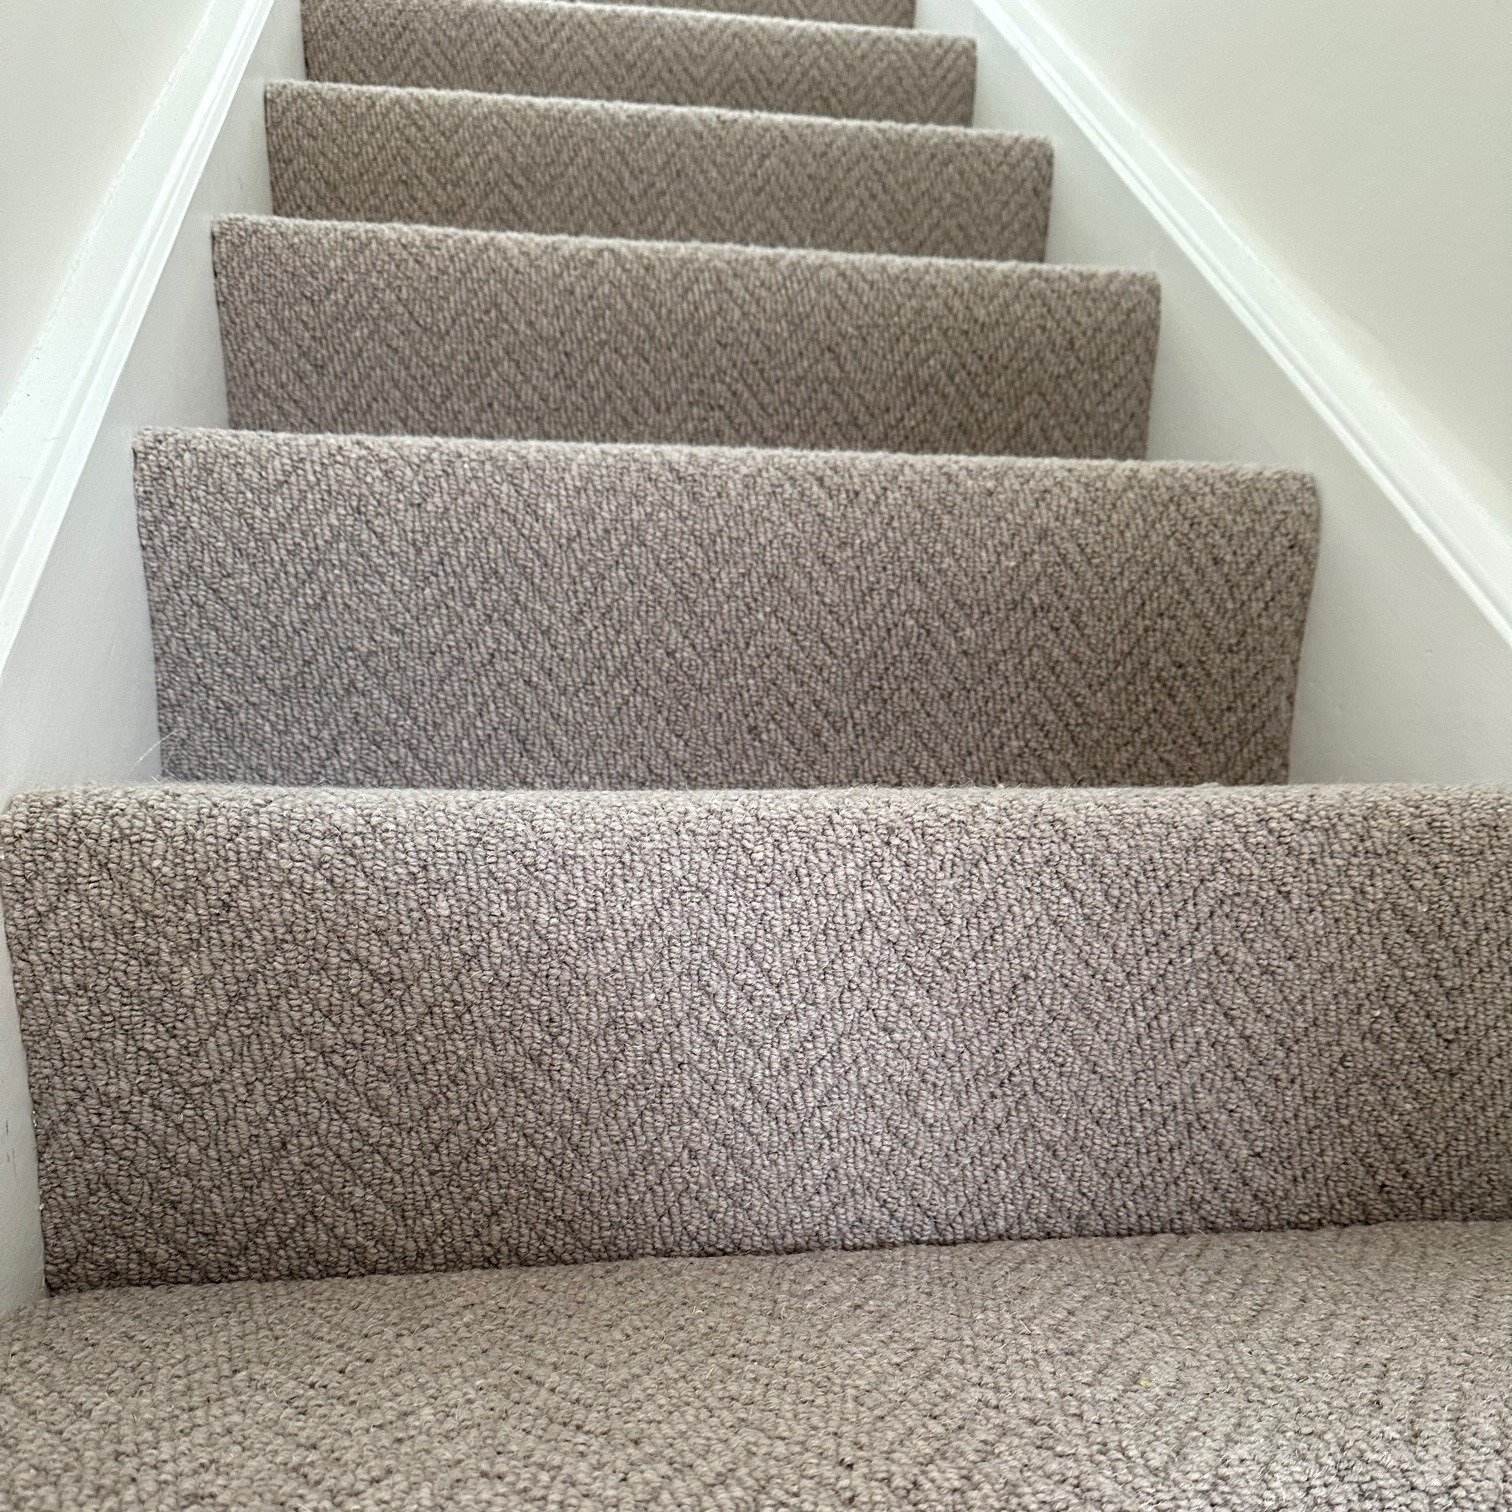 📸 @hughmackaycarpets 100% Wool Natural Origins Range - Colour Autumn Warmth

Fitted the Herringbone design on the Stairs &amp; the Boucle Design in the 2 Bedrooms! 
.
.
.
 #cleanhomecleanmind #carpets #yourhome #familybusiness #reviews #shaw #YourSp